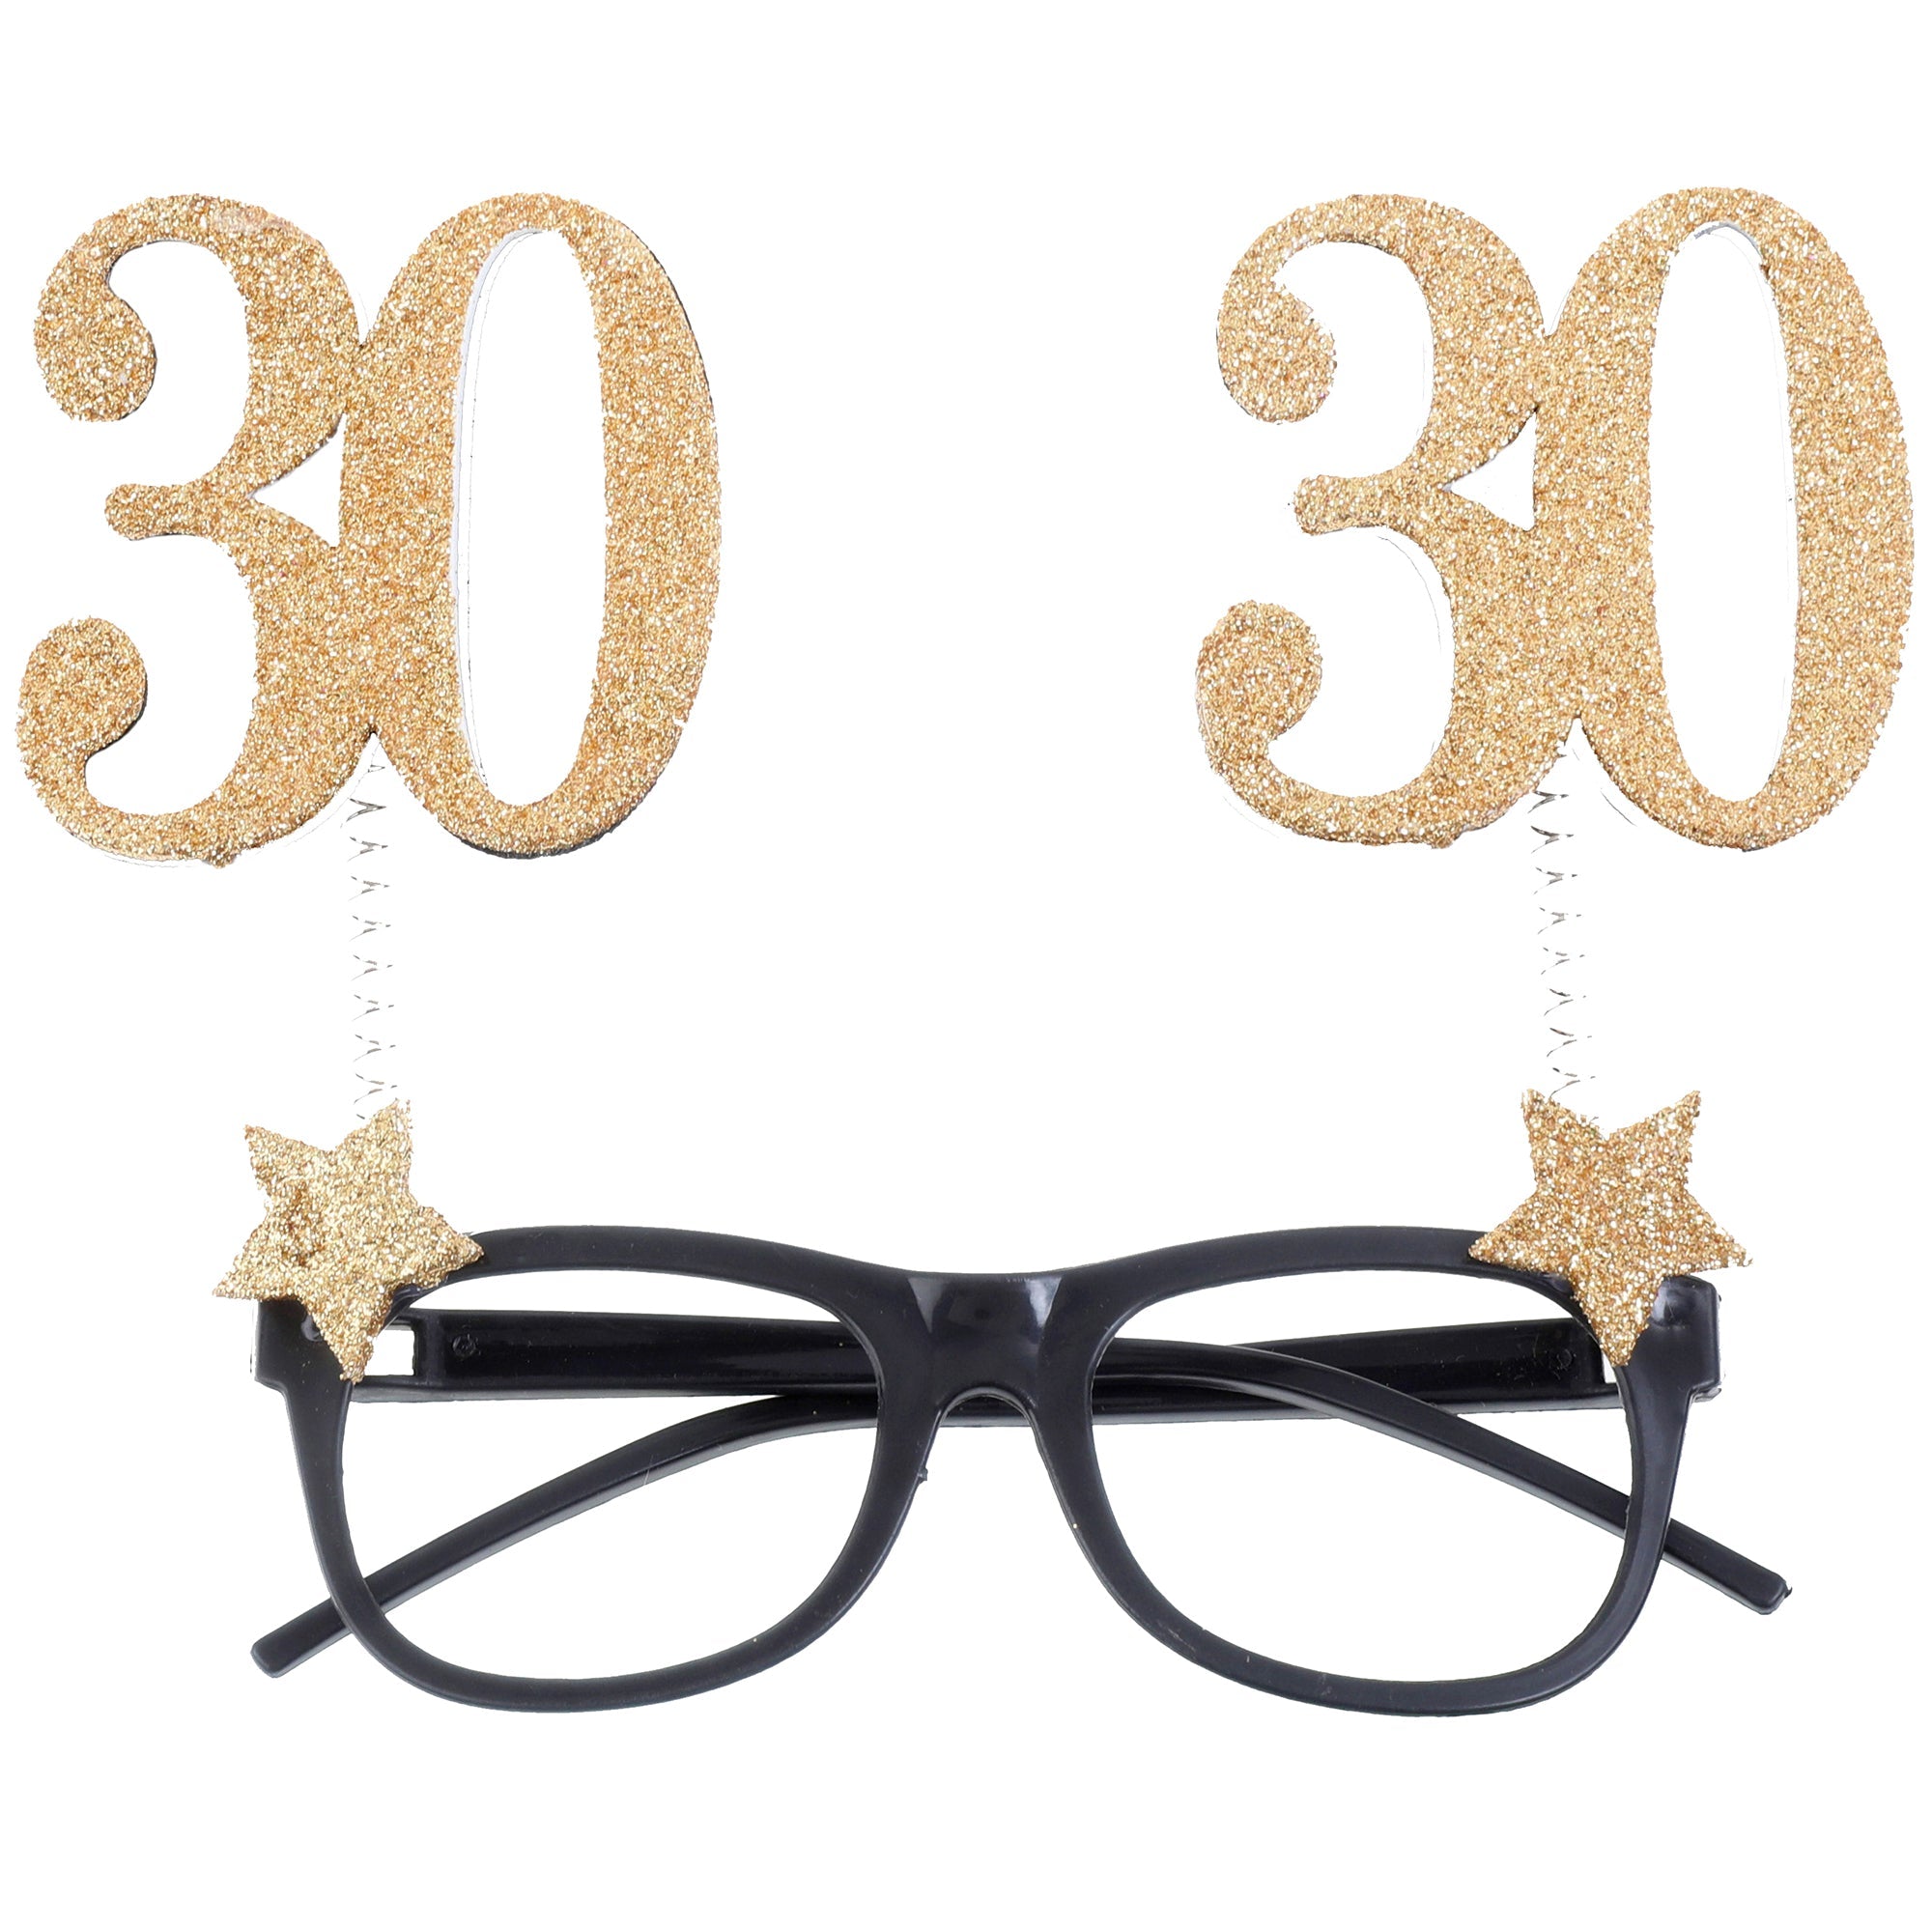 Age 30 Glasses Black and Gold 6x6.3in